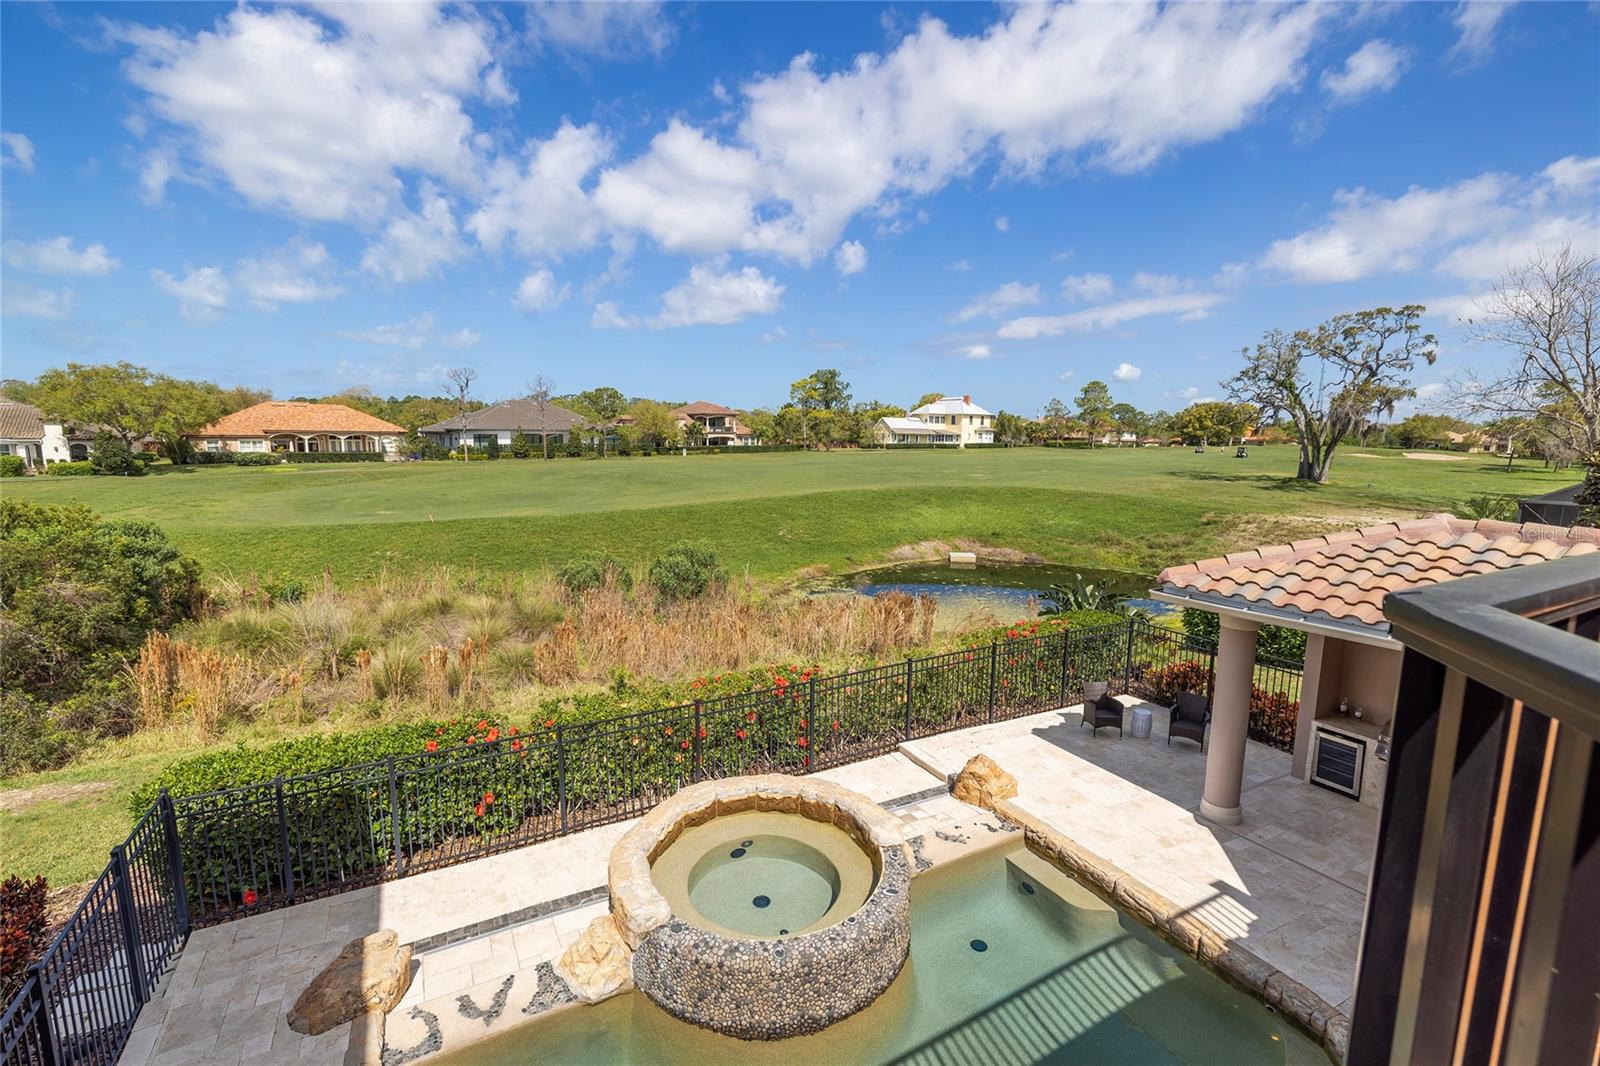 Pool and outdoor spaces have golf course views.